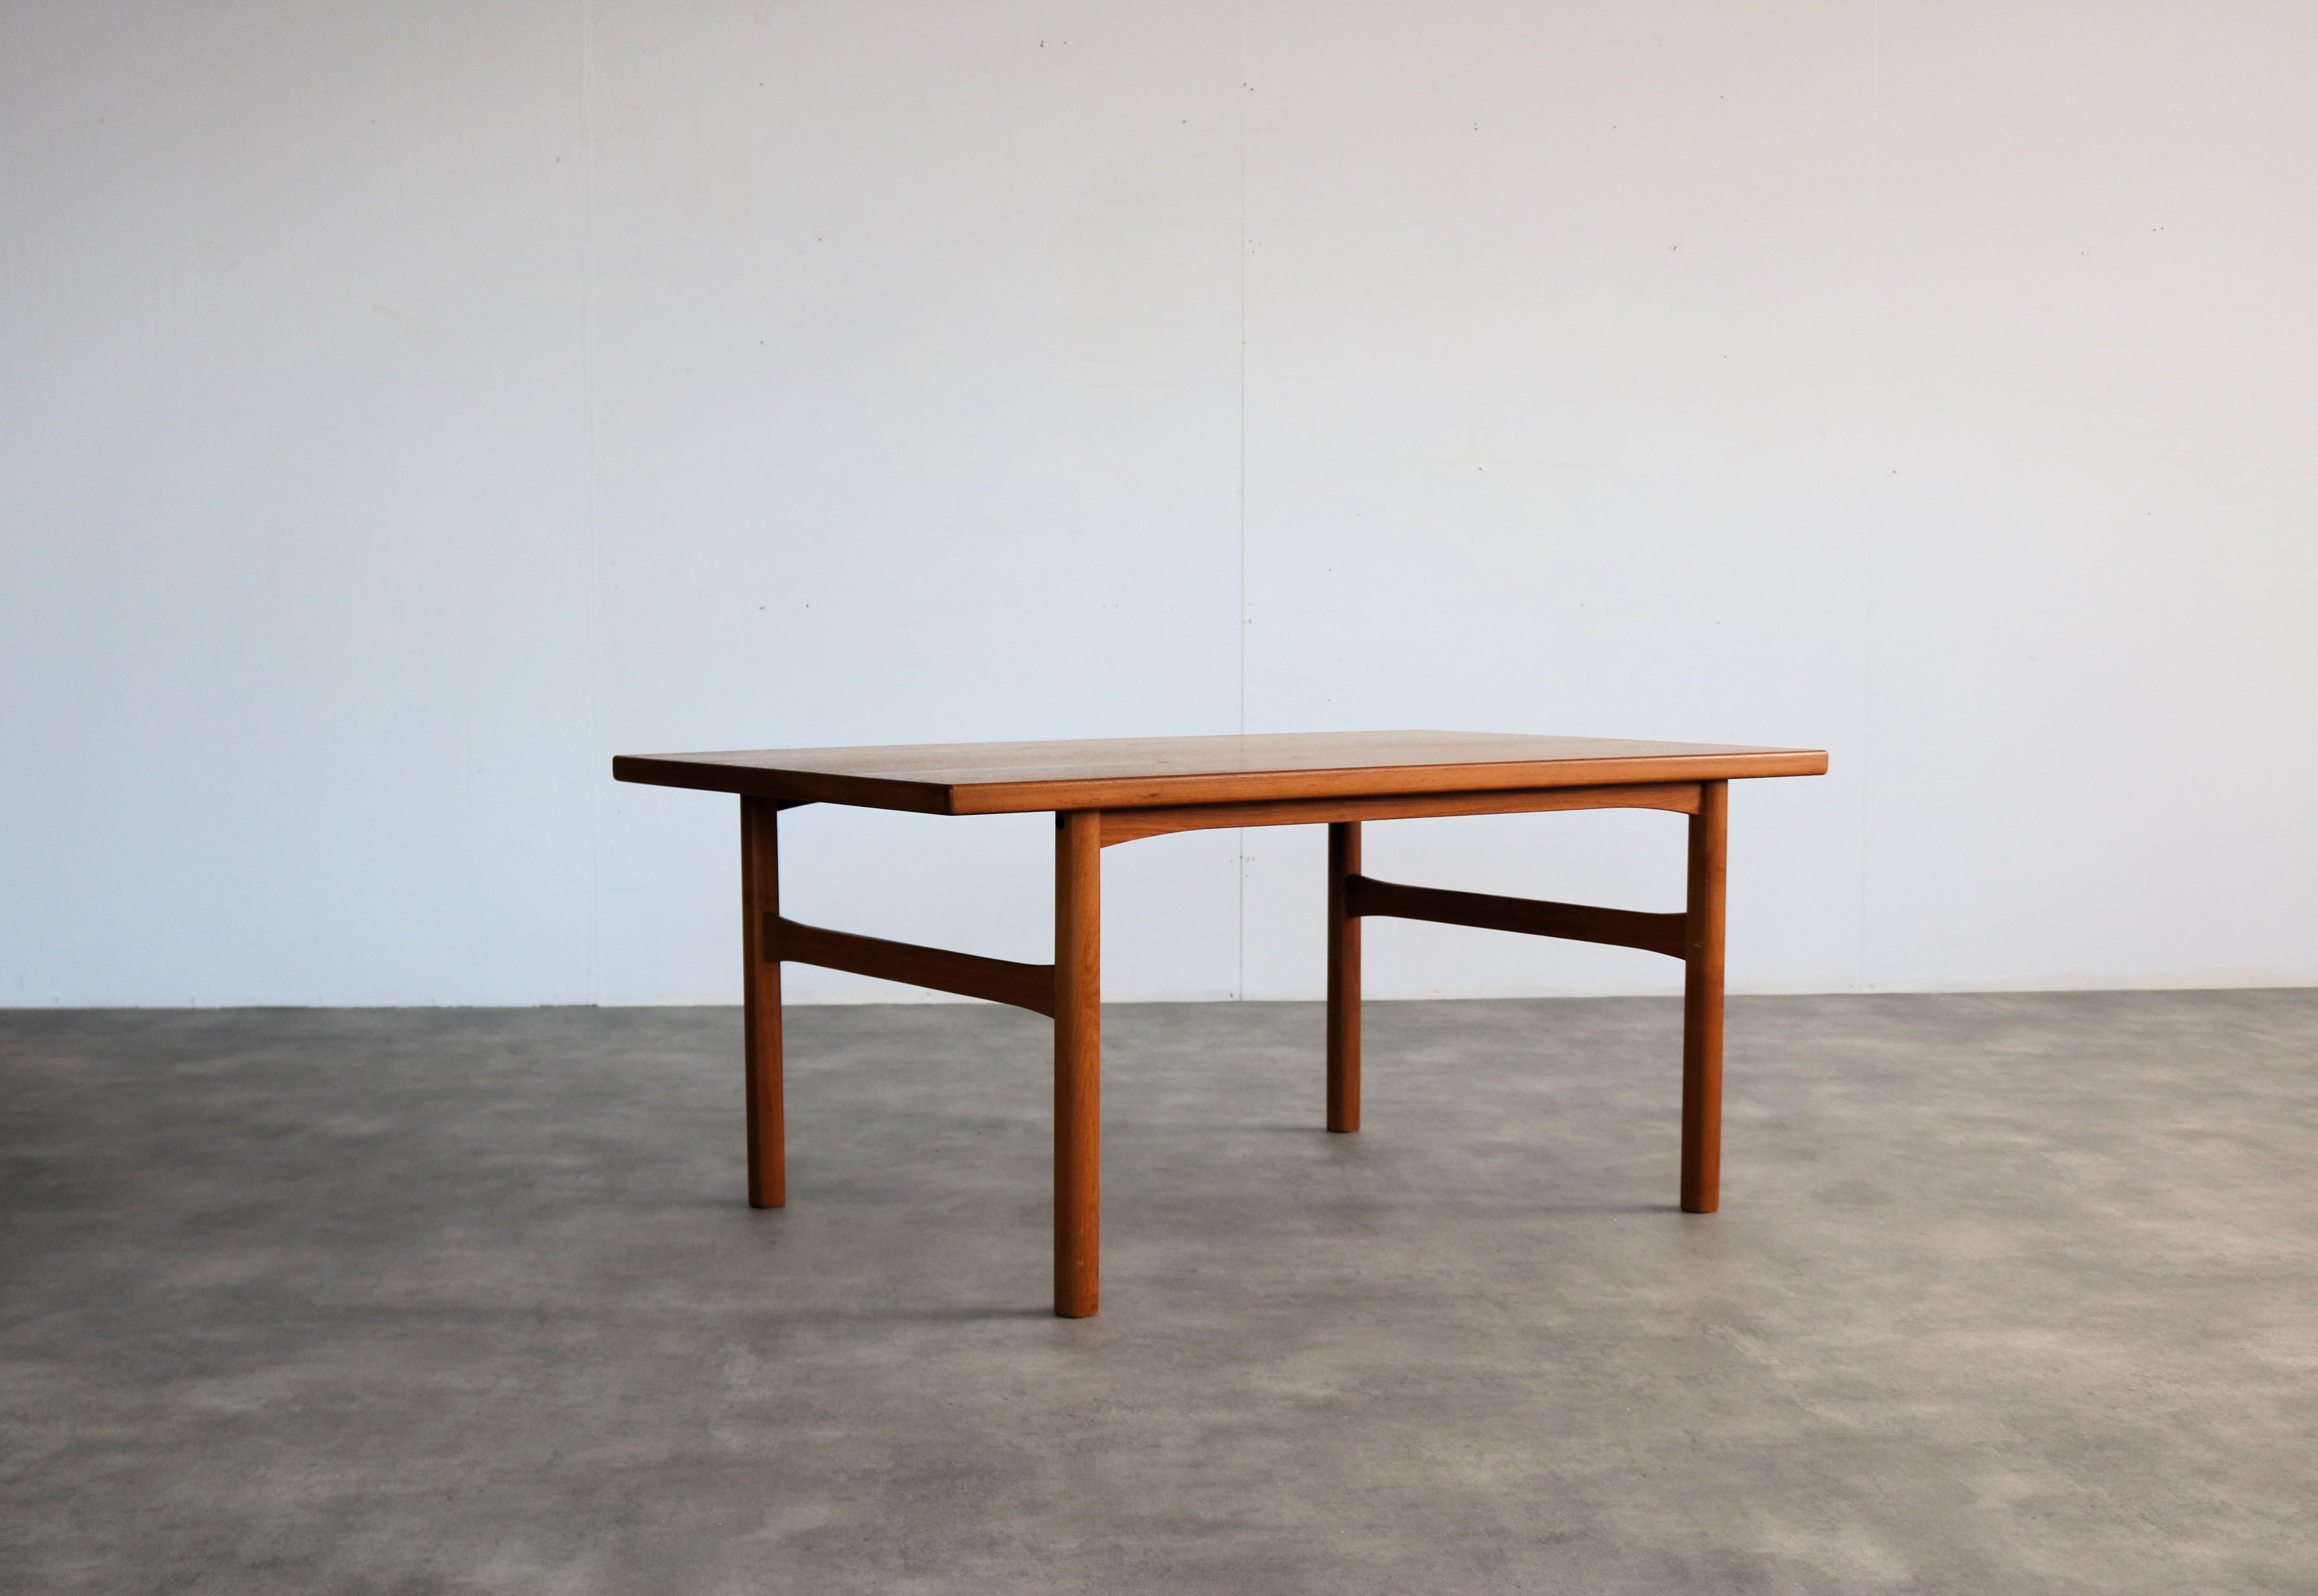 vintage coffee table | teak | 60s | Sweden

period | 60's
design | unknown | Sweden
condition | good | light signs of use
size | 56 x 130 x 77 (hxwxd)

details | teak;

article number | 2235